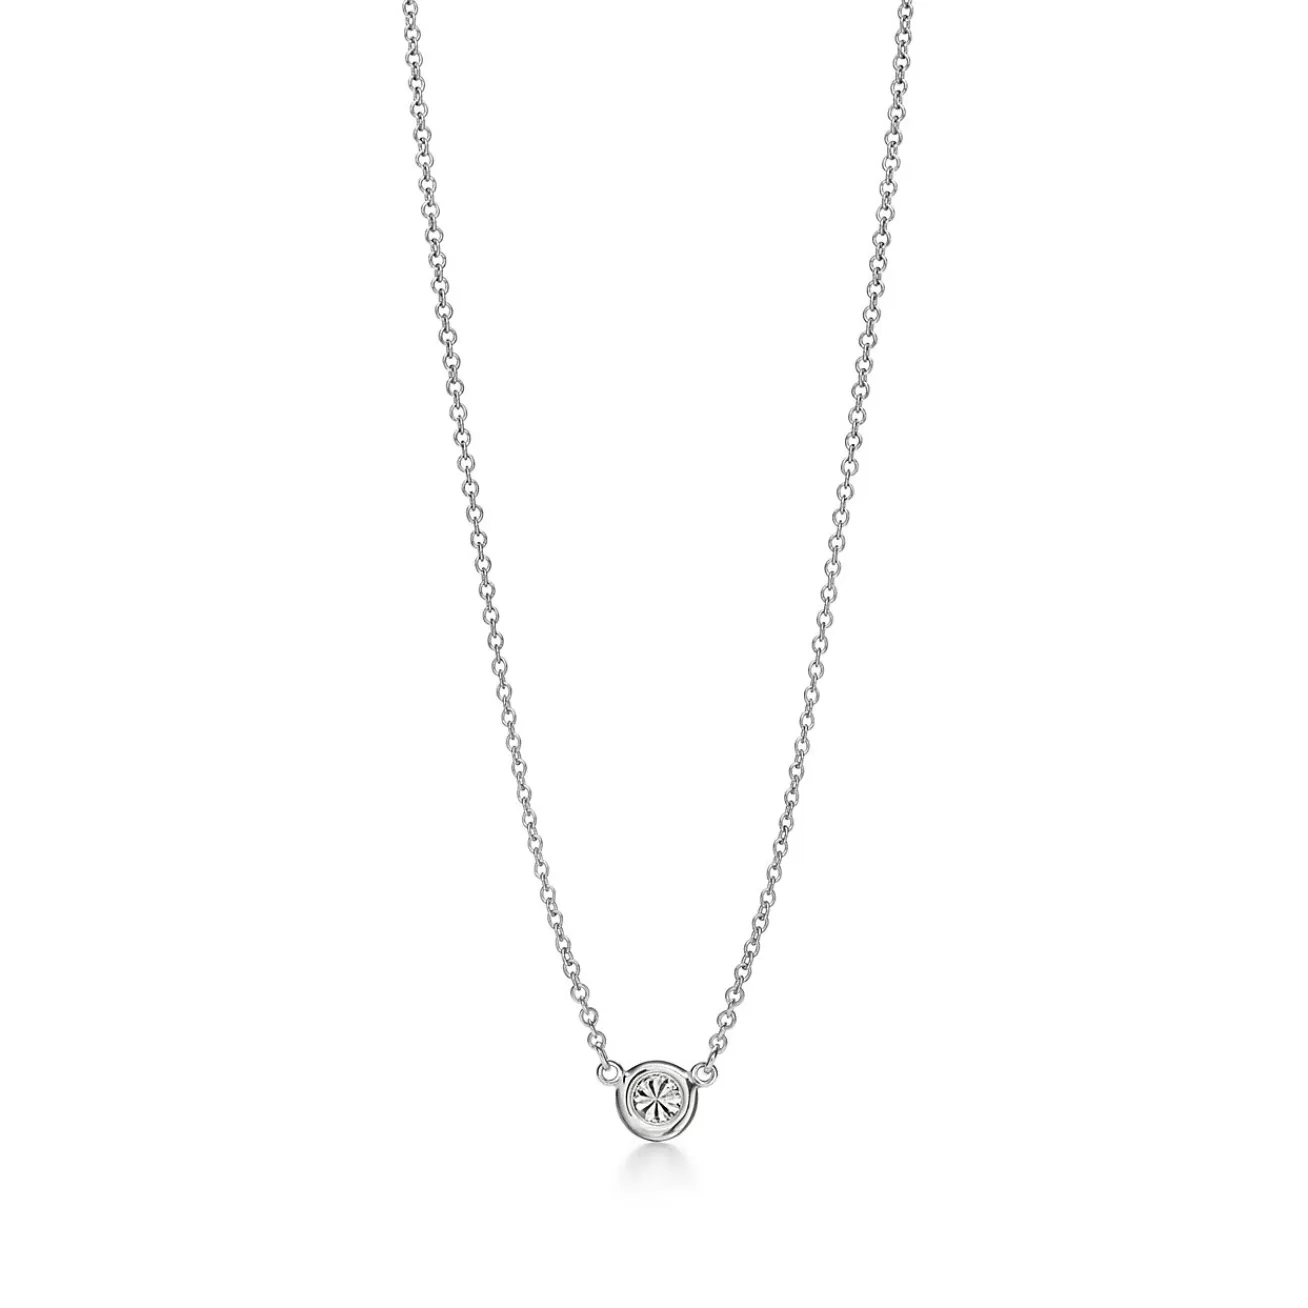 Tiffany & Co. Elsa Peretti® Diamonds by the Yard® pendant in platinum 16" long. | ^ Necklaces & Pendants | Gifts for Her